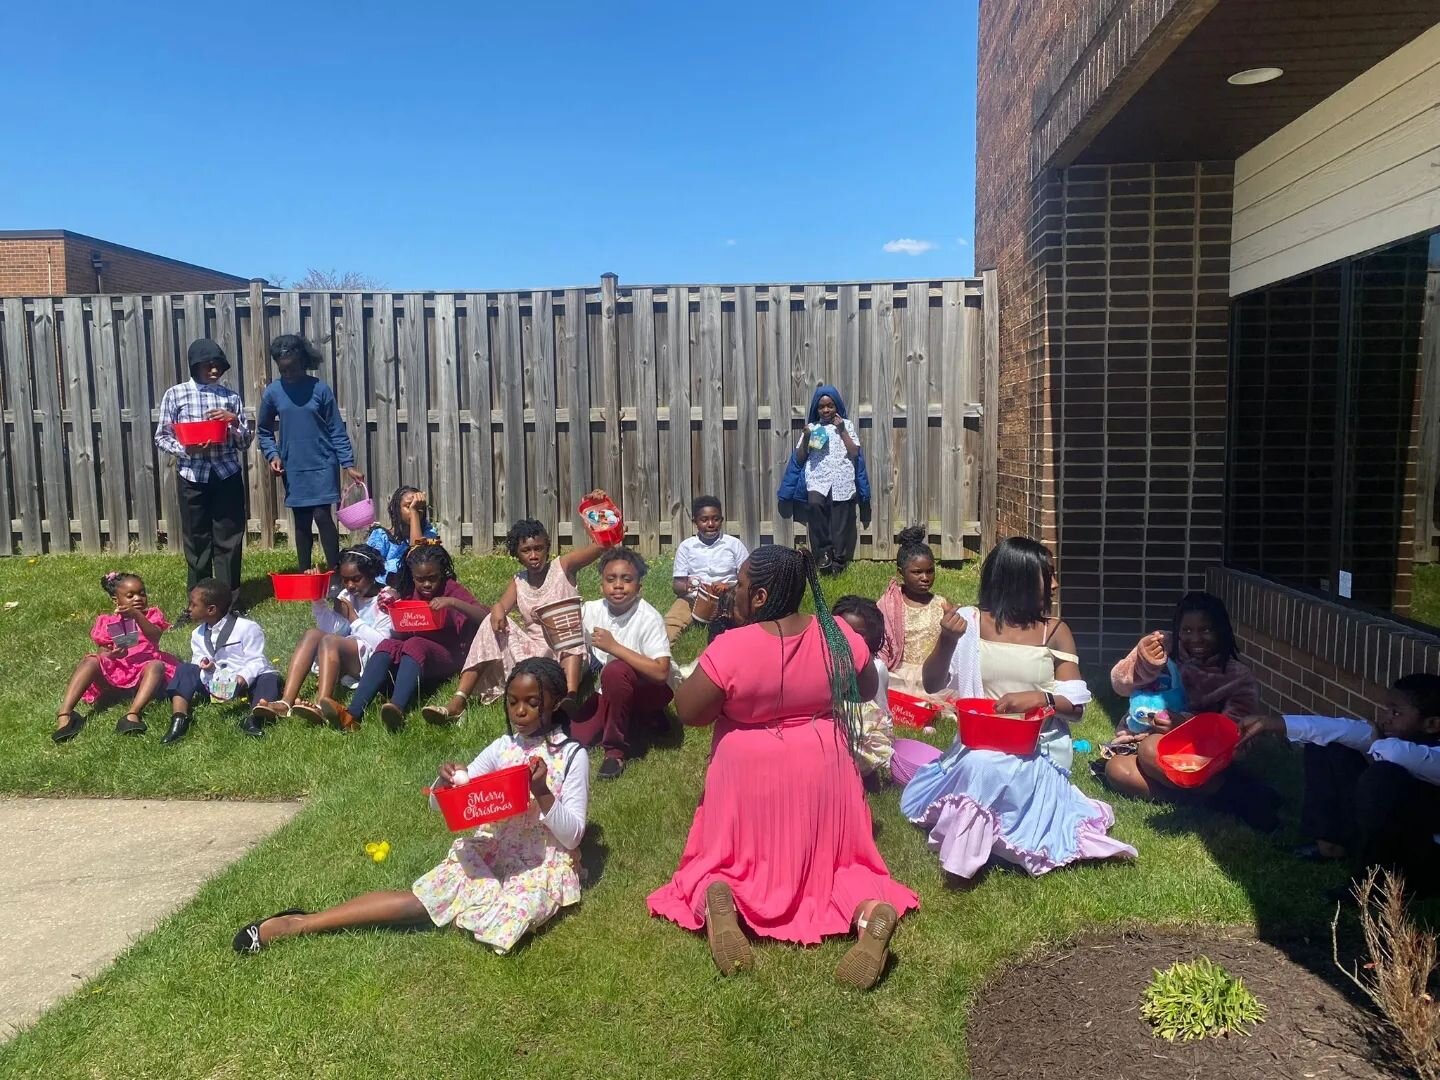 &quot;All your children shall be taught by the Lord, and great shall be the peace of your children.&rdquo; Isaiah 54:13
_____________
Easter egg hunt cc 2023 with our beloved Redemption Children's Ministry.
_____________
#Easter2023 #EasterEggHunt #C